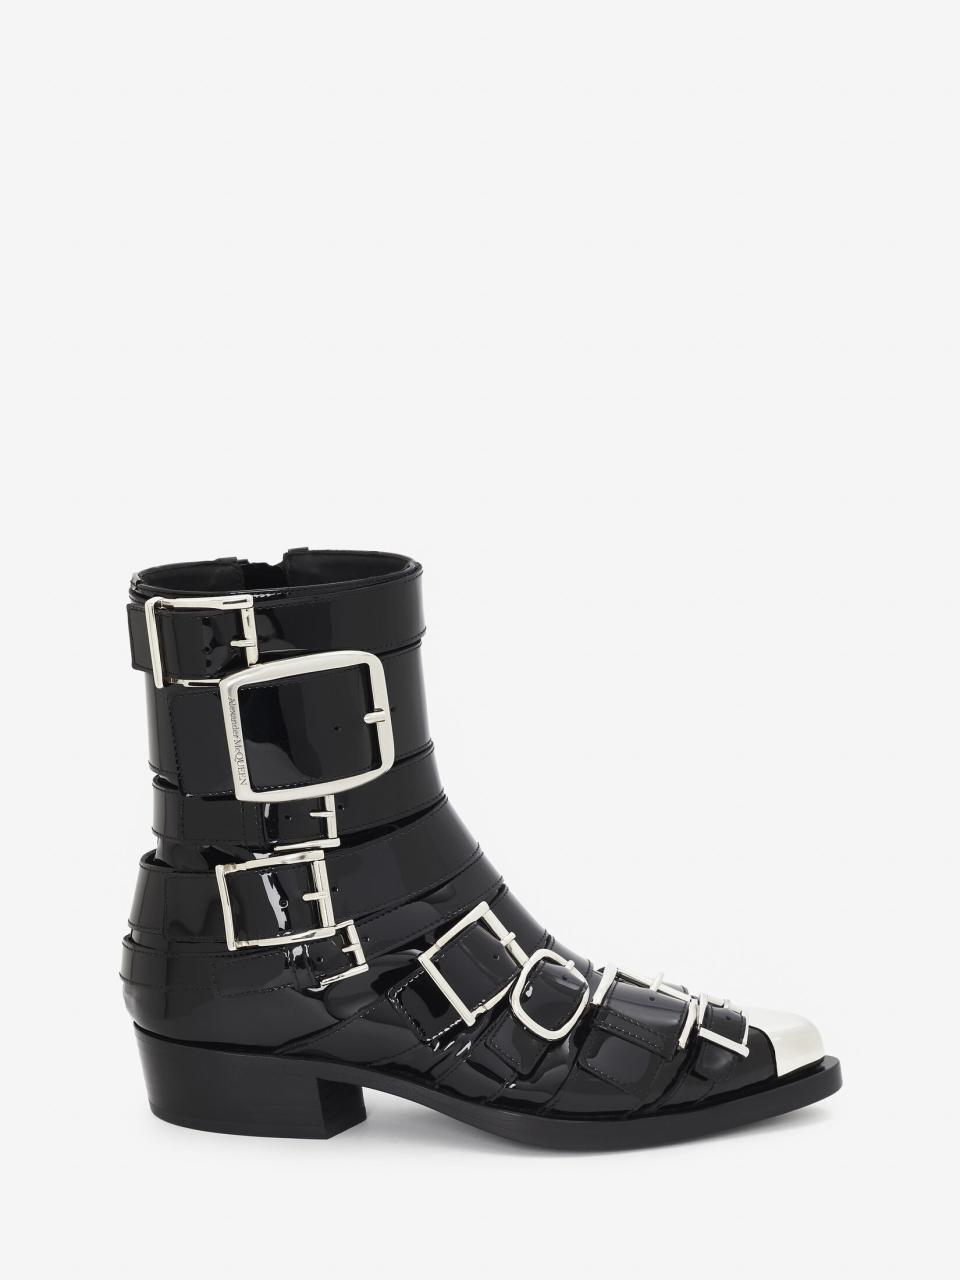 Alexander McQueen's Women's Punk Buckle Boot in Black/silver. Price tag: 1 590 €